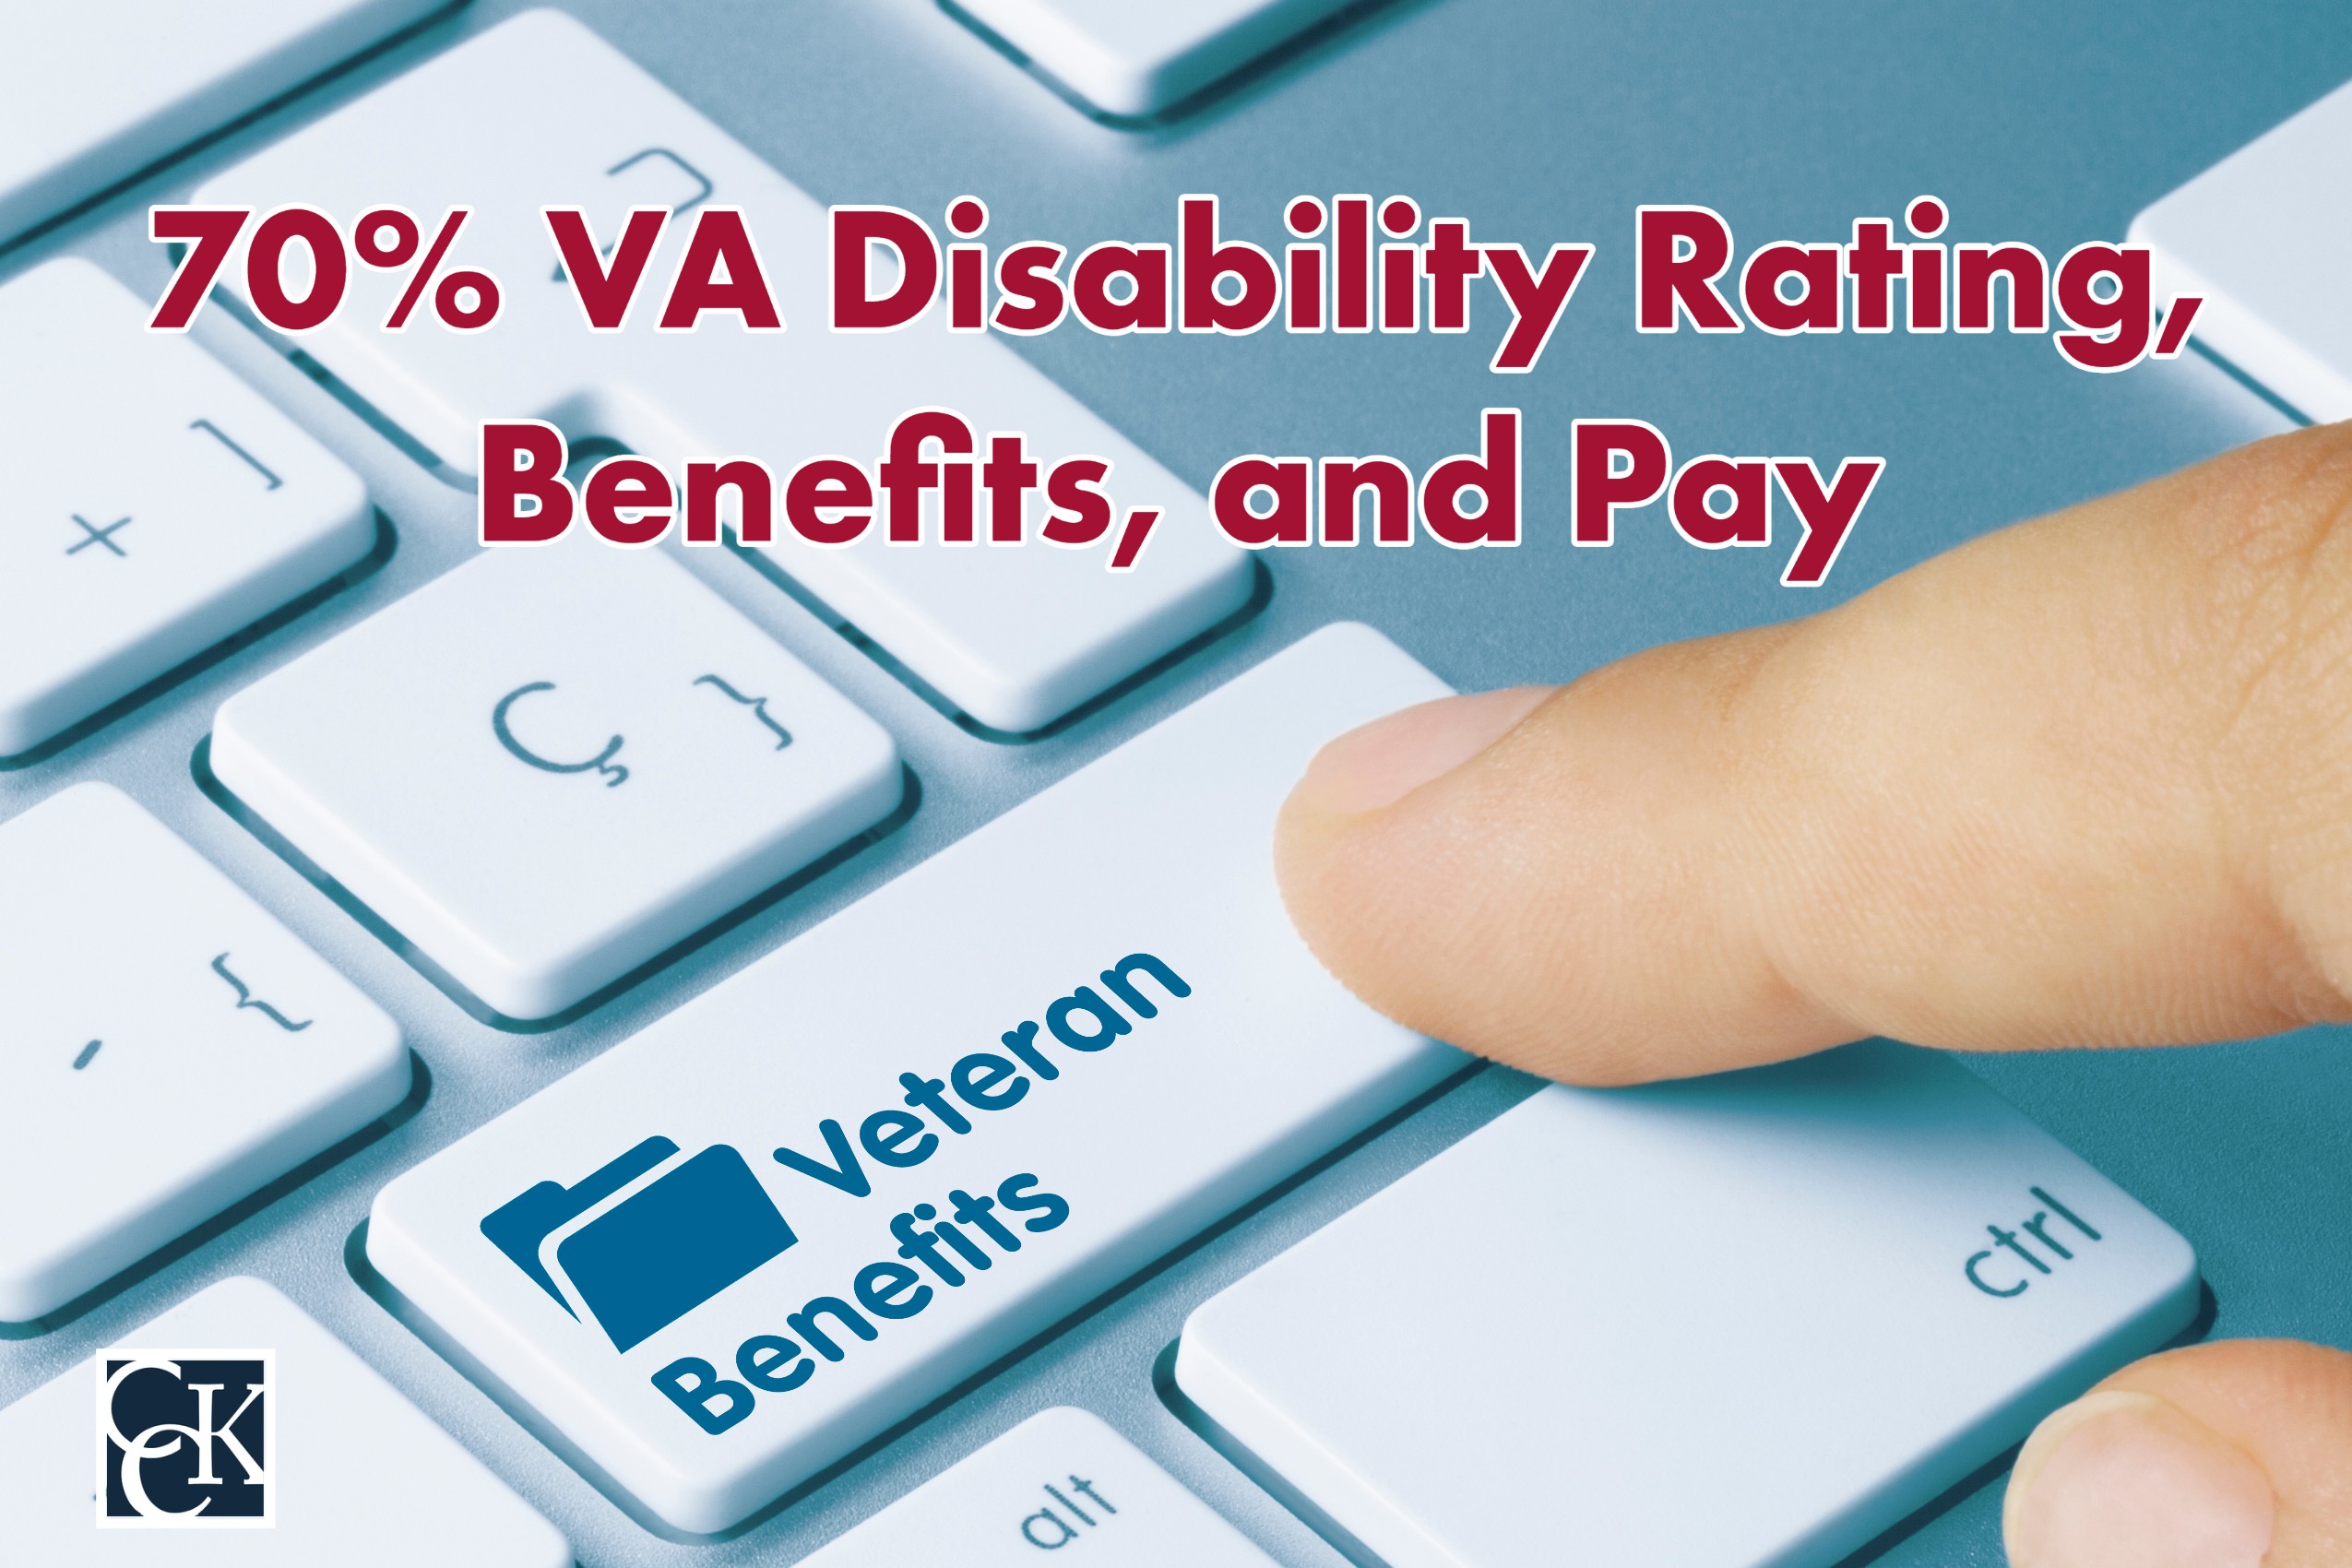 Benefits for veterans with a 100% disability rating